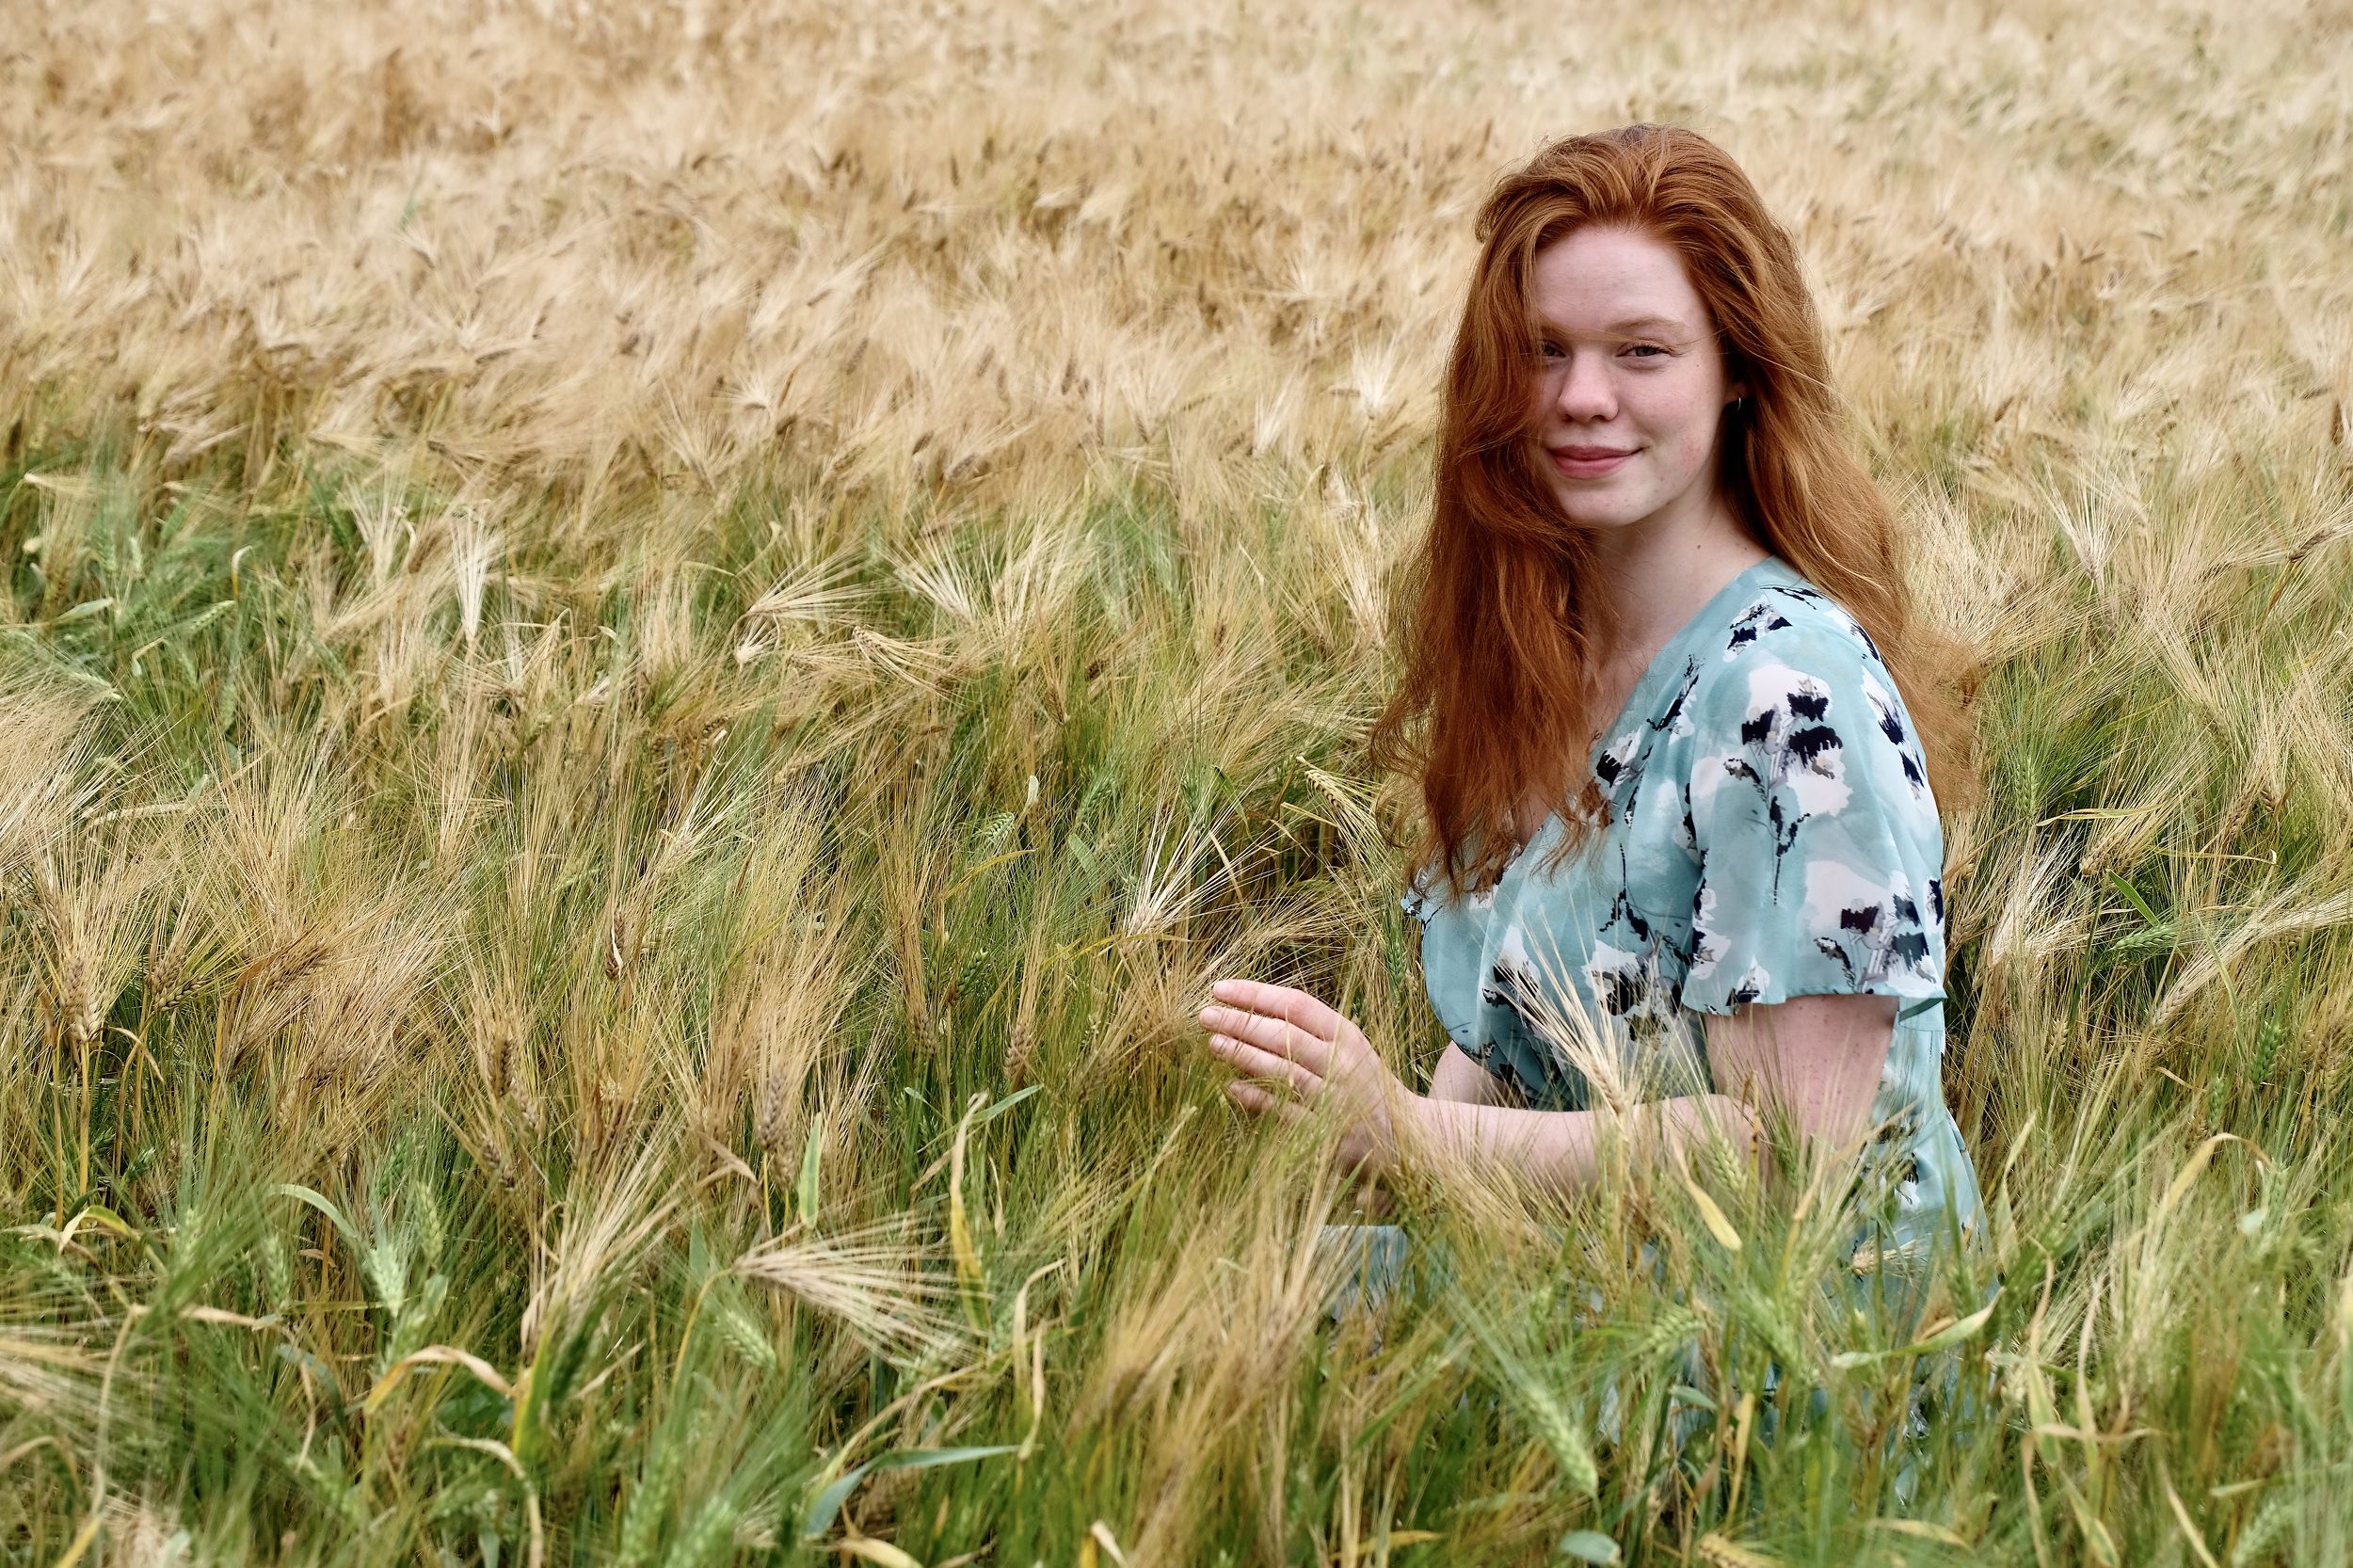 Mood portrait, people, portrait, young woman, Norway, field, august, red hair, colors, nature, , Svetlana Povarova Ree